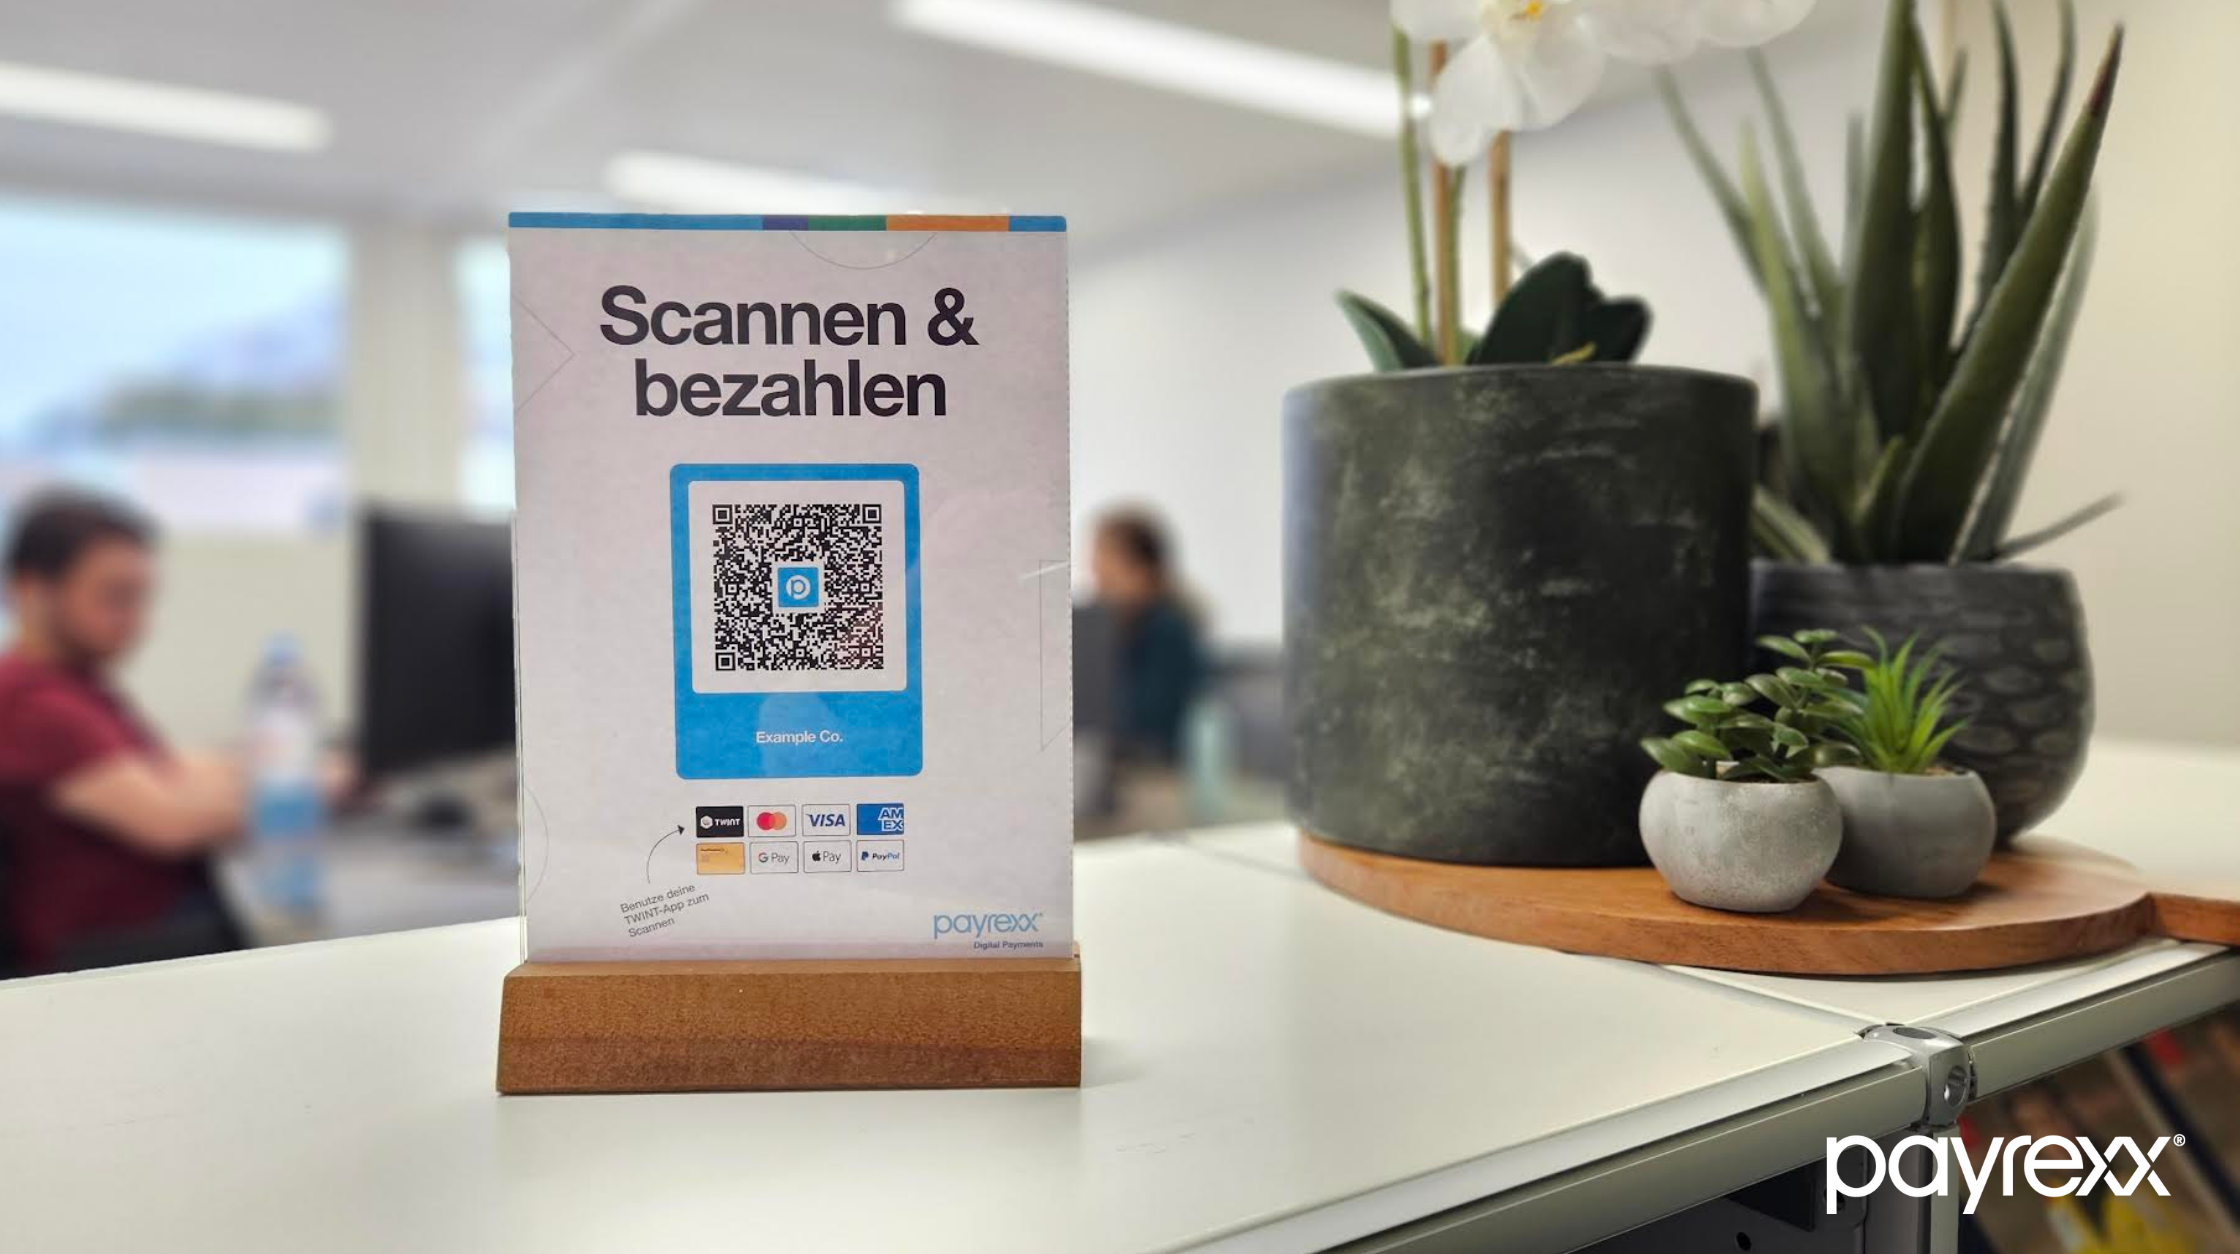 "Payrexx QR Pay" is awarded the Innovation Prize of the Bernese Oberland Economy